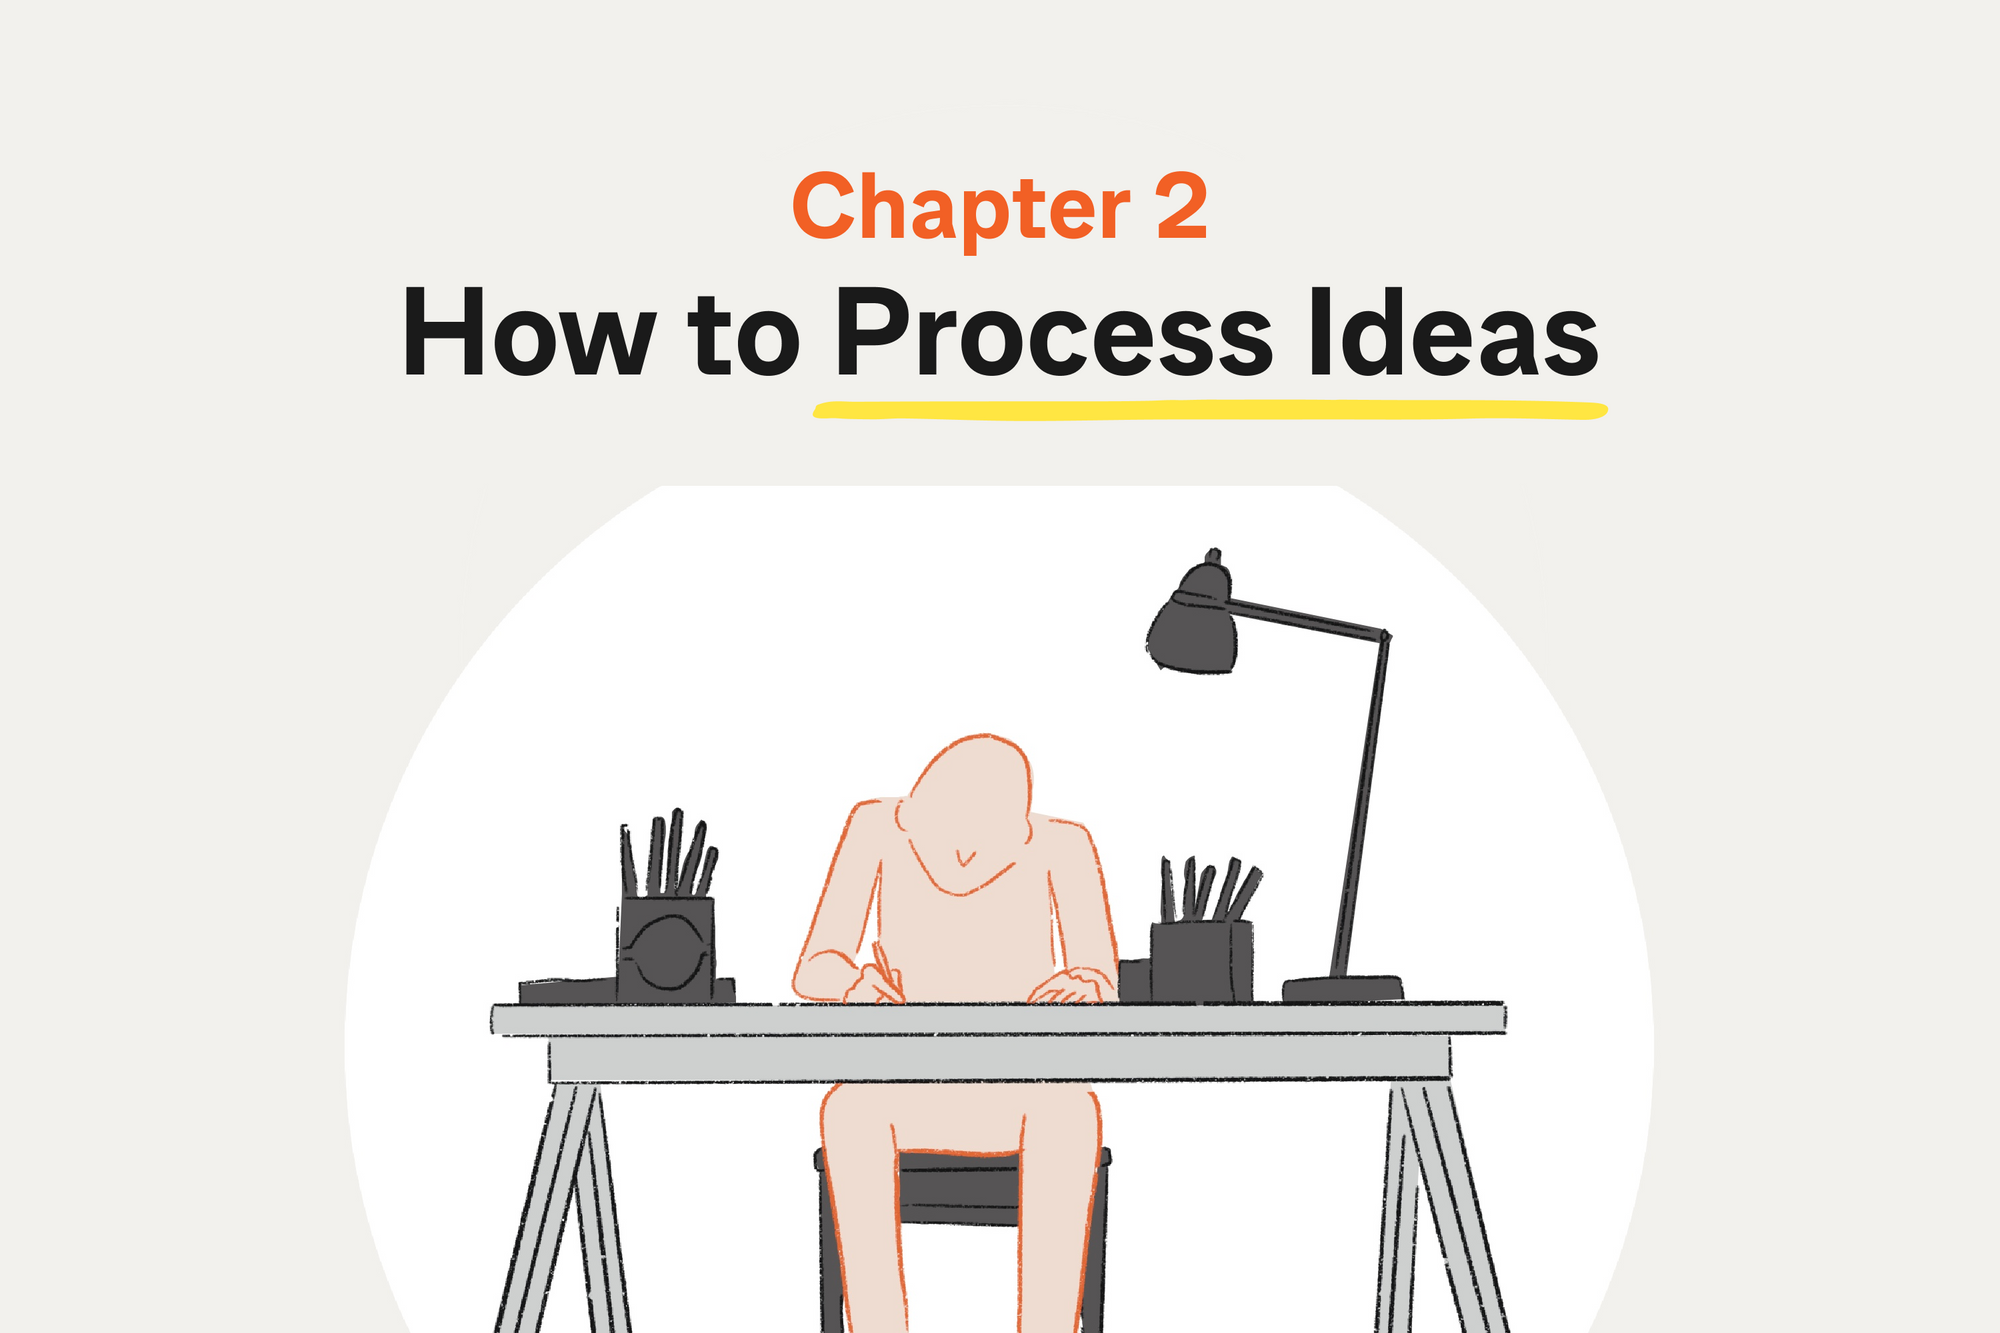 Chapter 2: How to Process Ideas